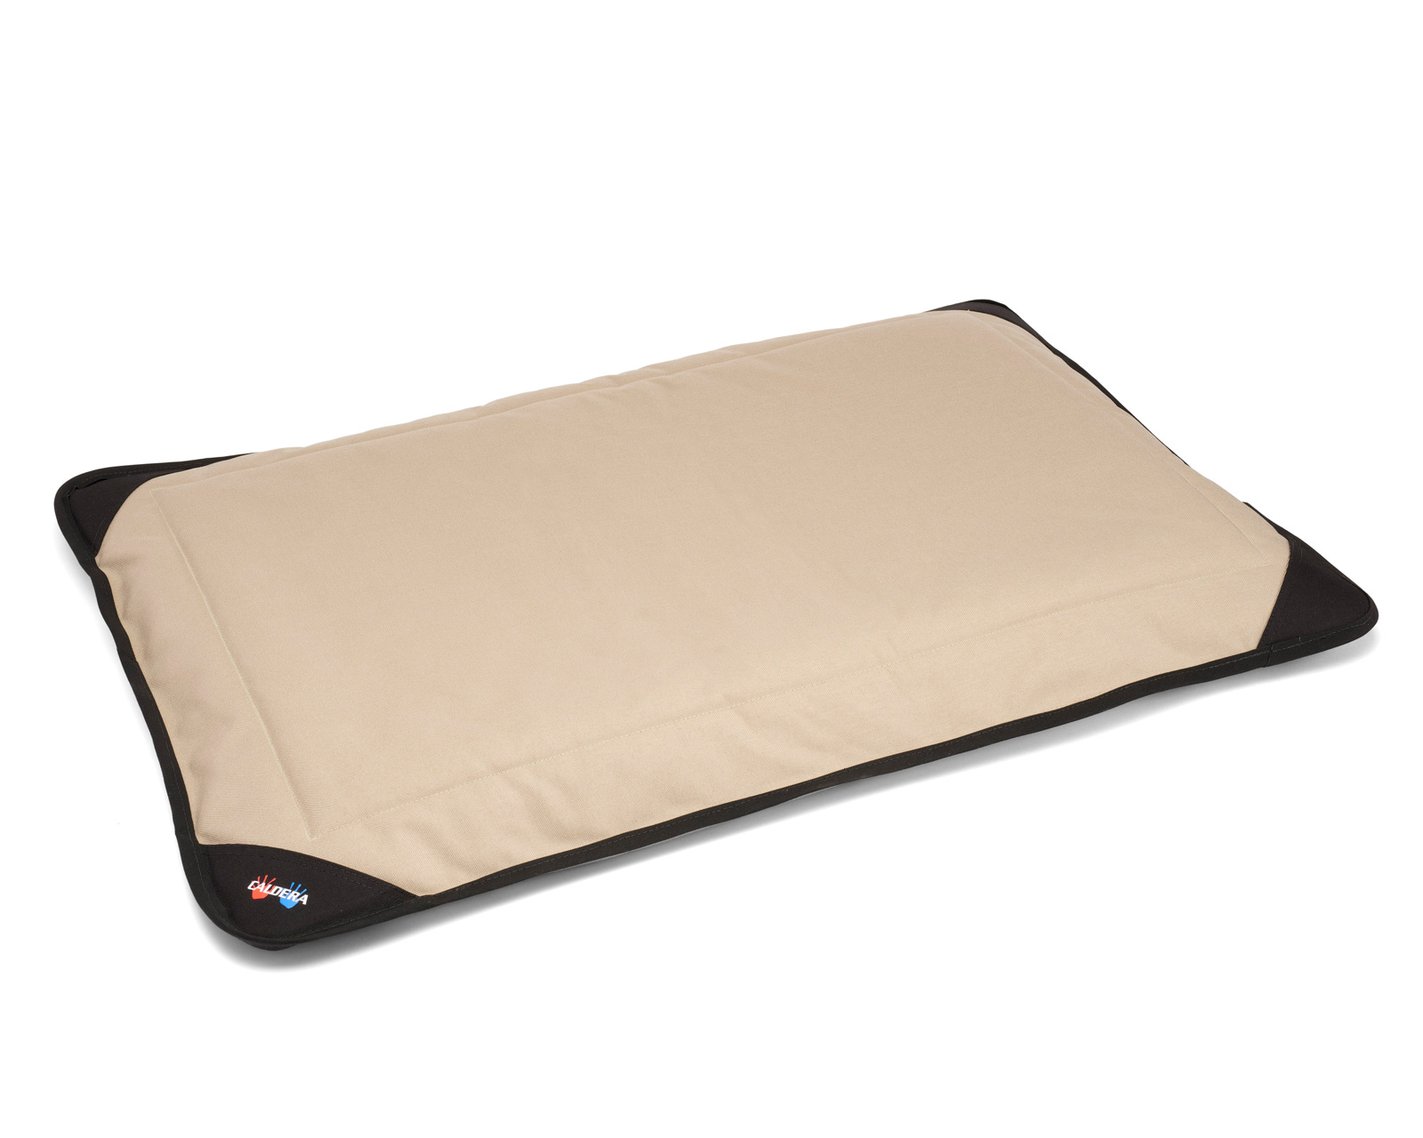 Heating and Cooling Pet Bed - Large